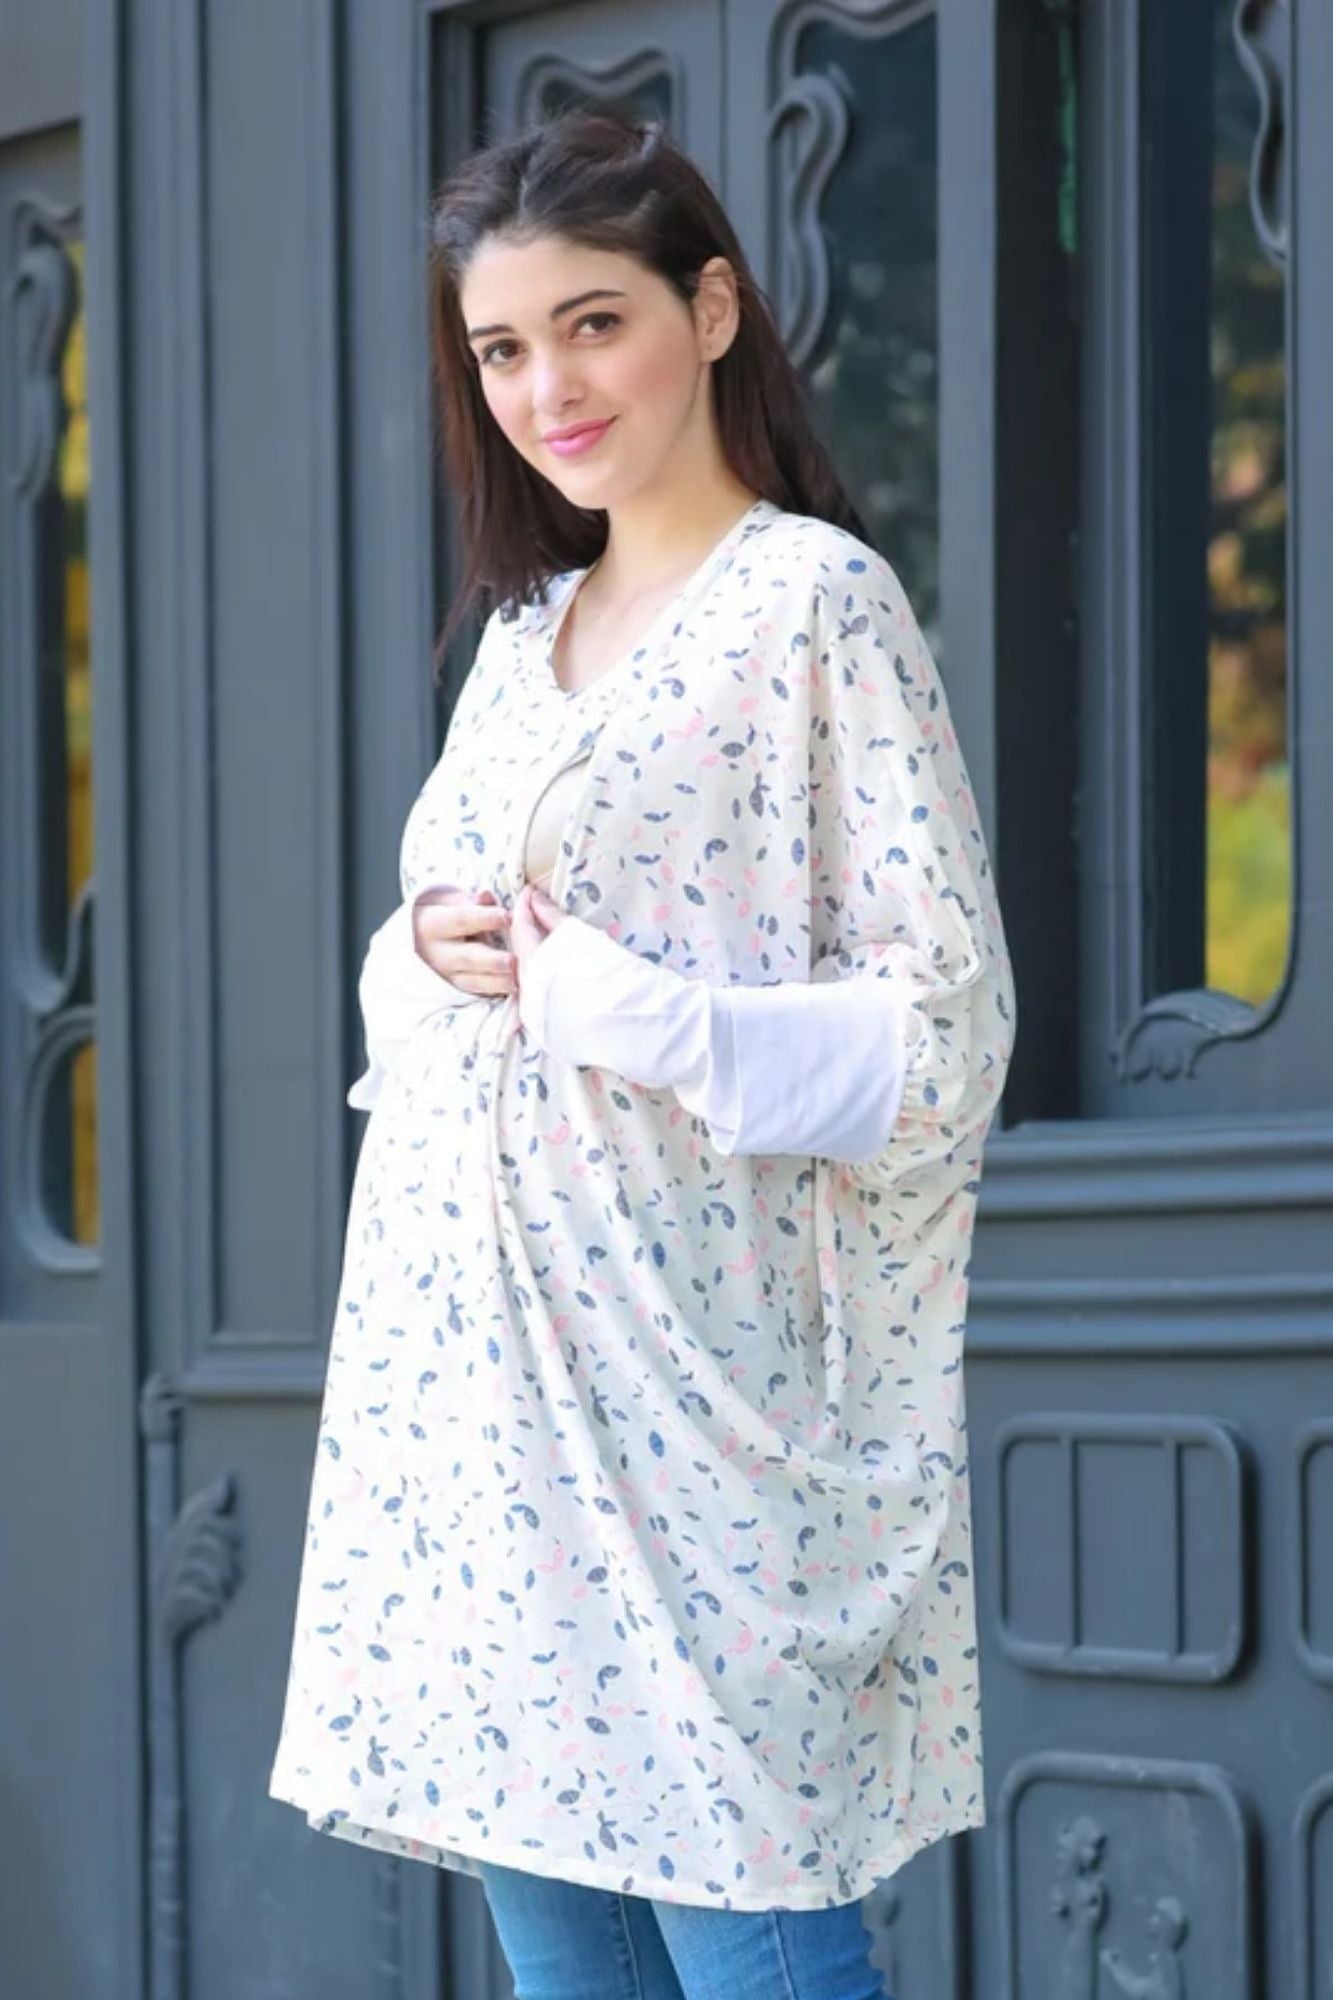 9 Best Labor and Delivery Gowns of 2023